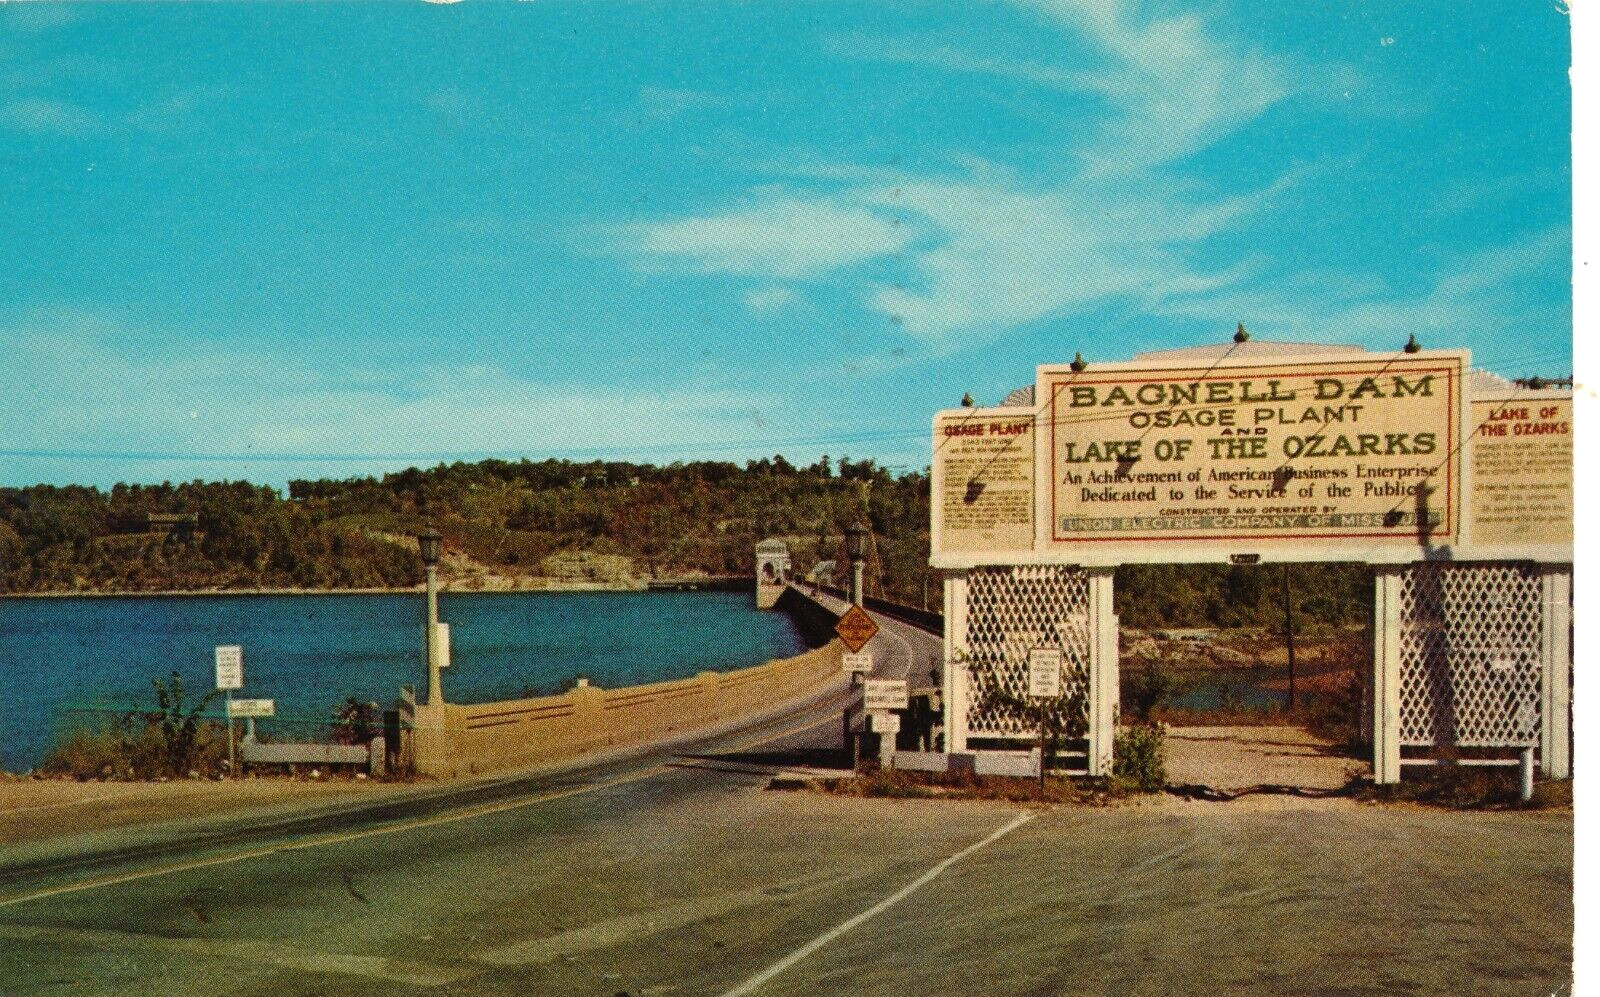 Bagnell Dam at Lake of the Ozarks, Missouri 1967 posted postcard